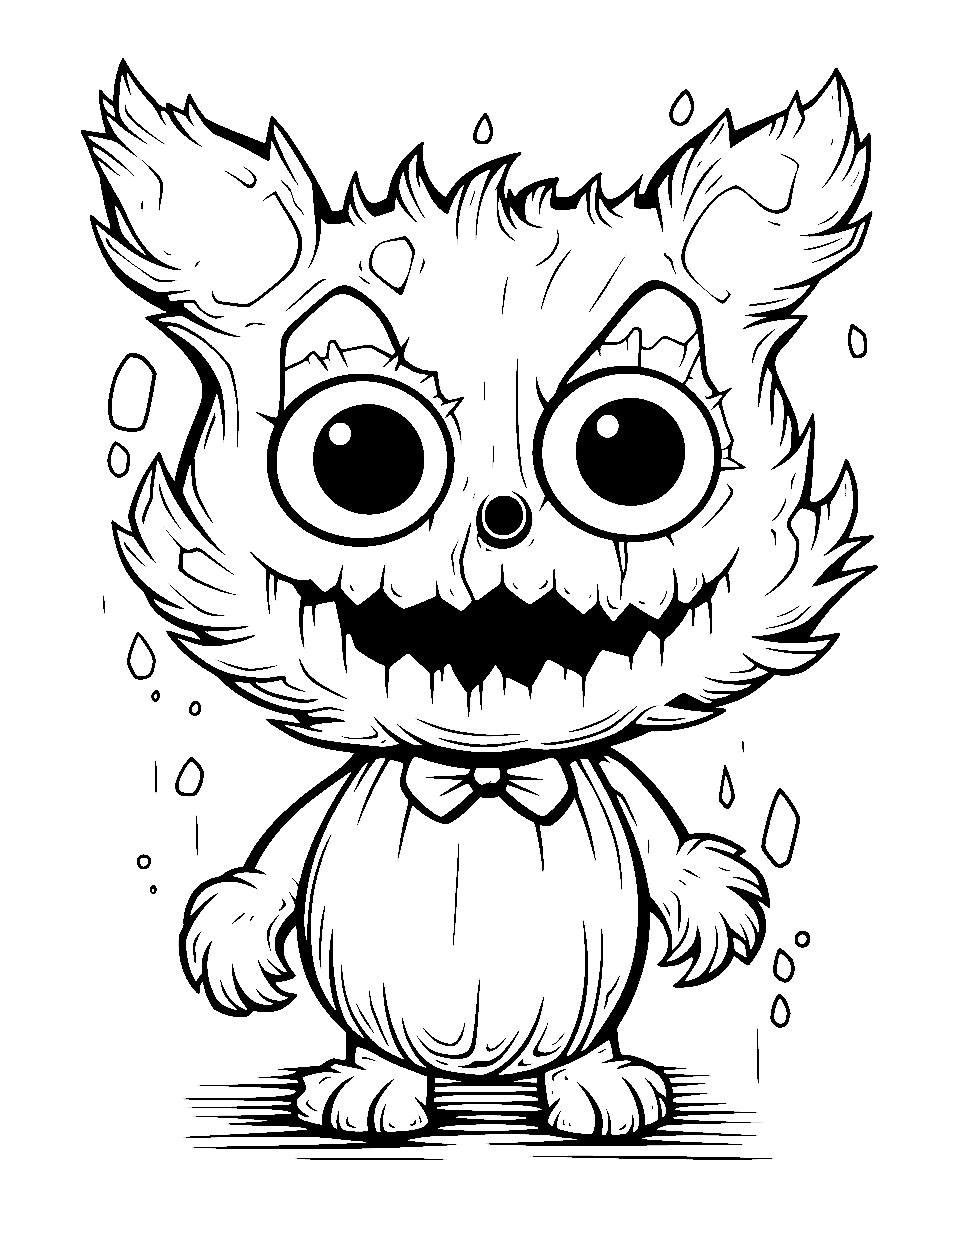 Nightmare’s Ominous Stare Five Nights at Freddys Coloring Page - Nightmare peering through the darkness with crazy eyes.